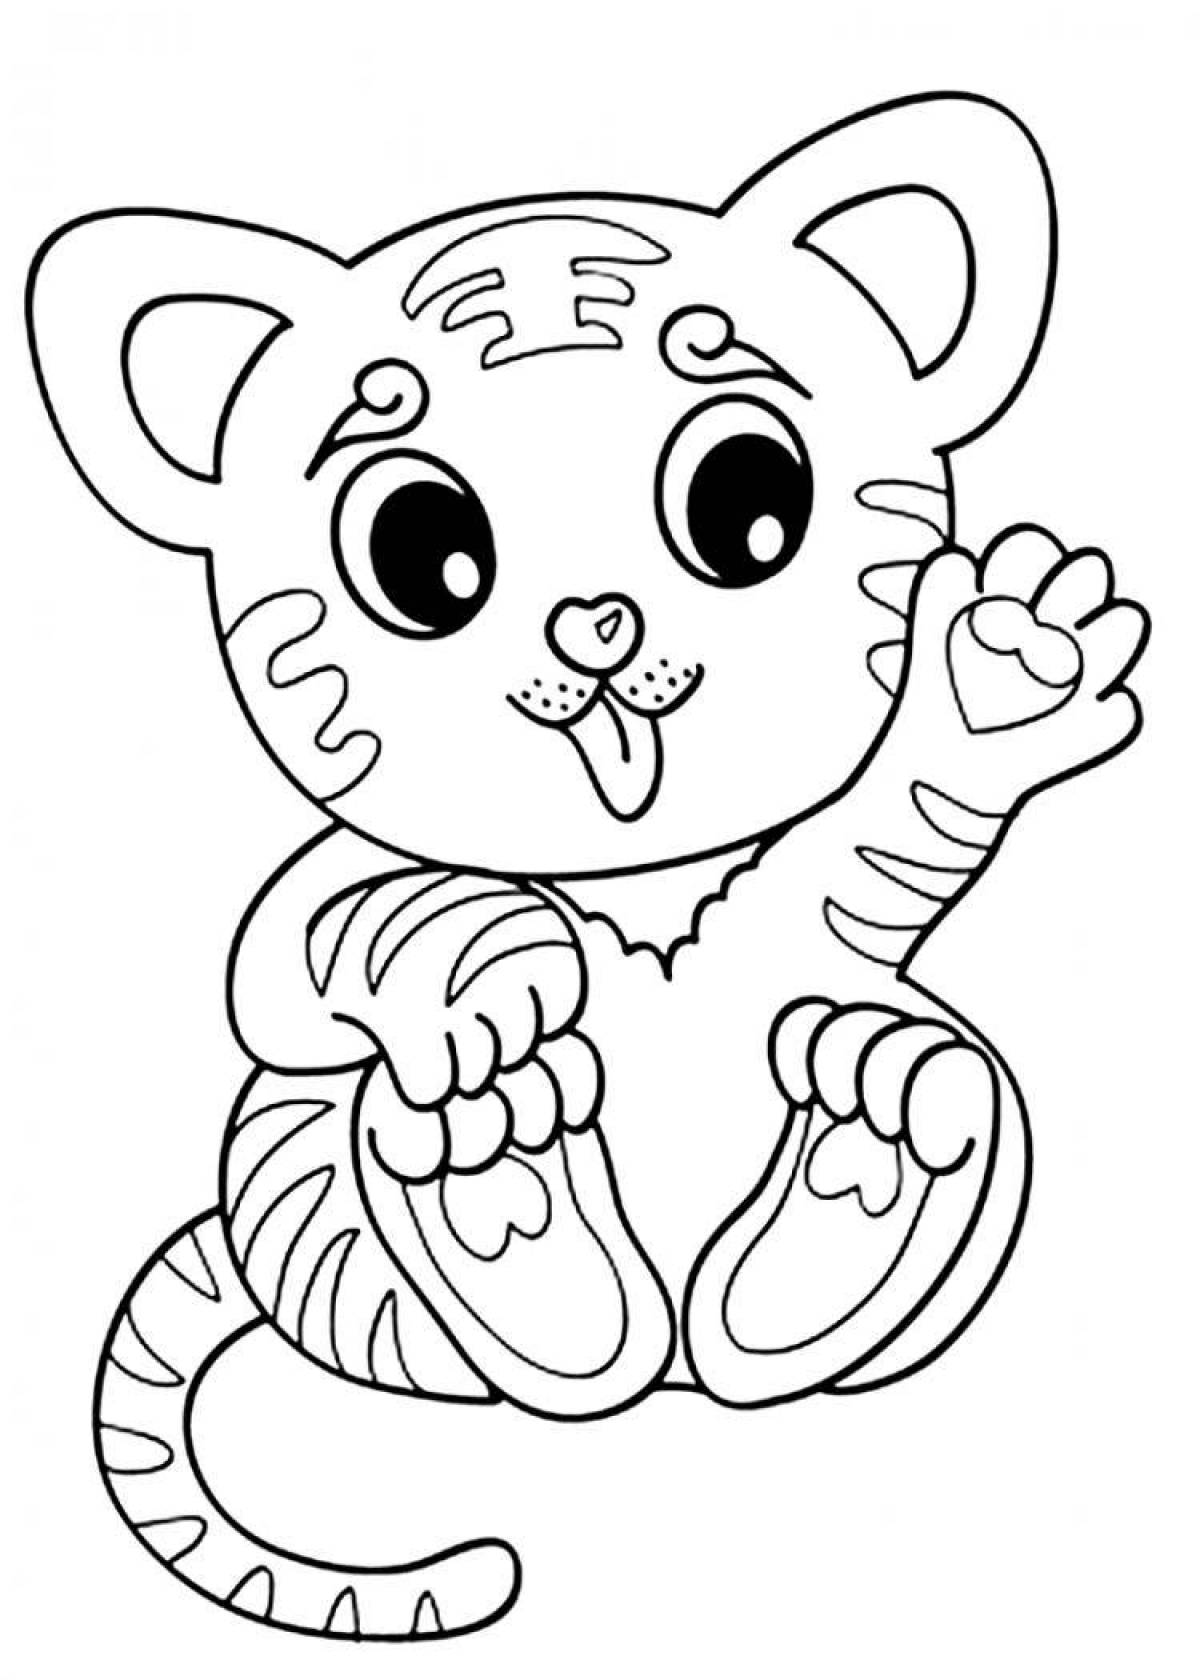 Cute animal coloring pages for kids